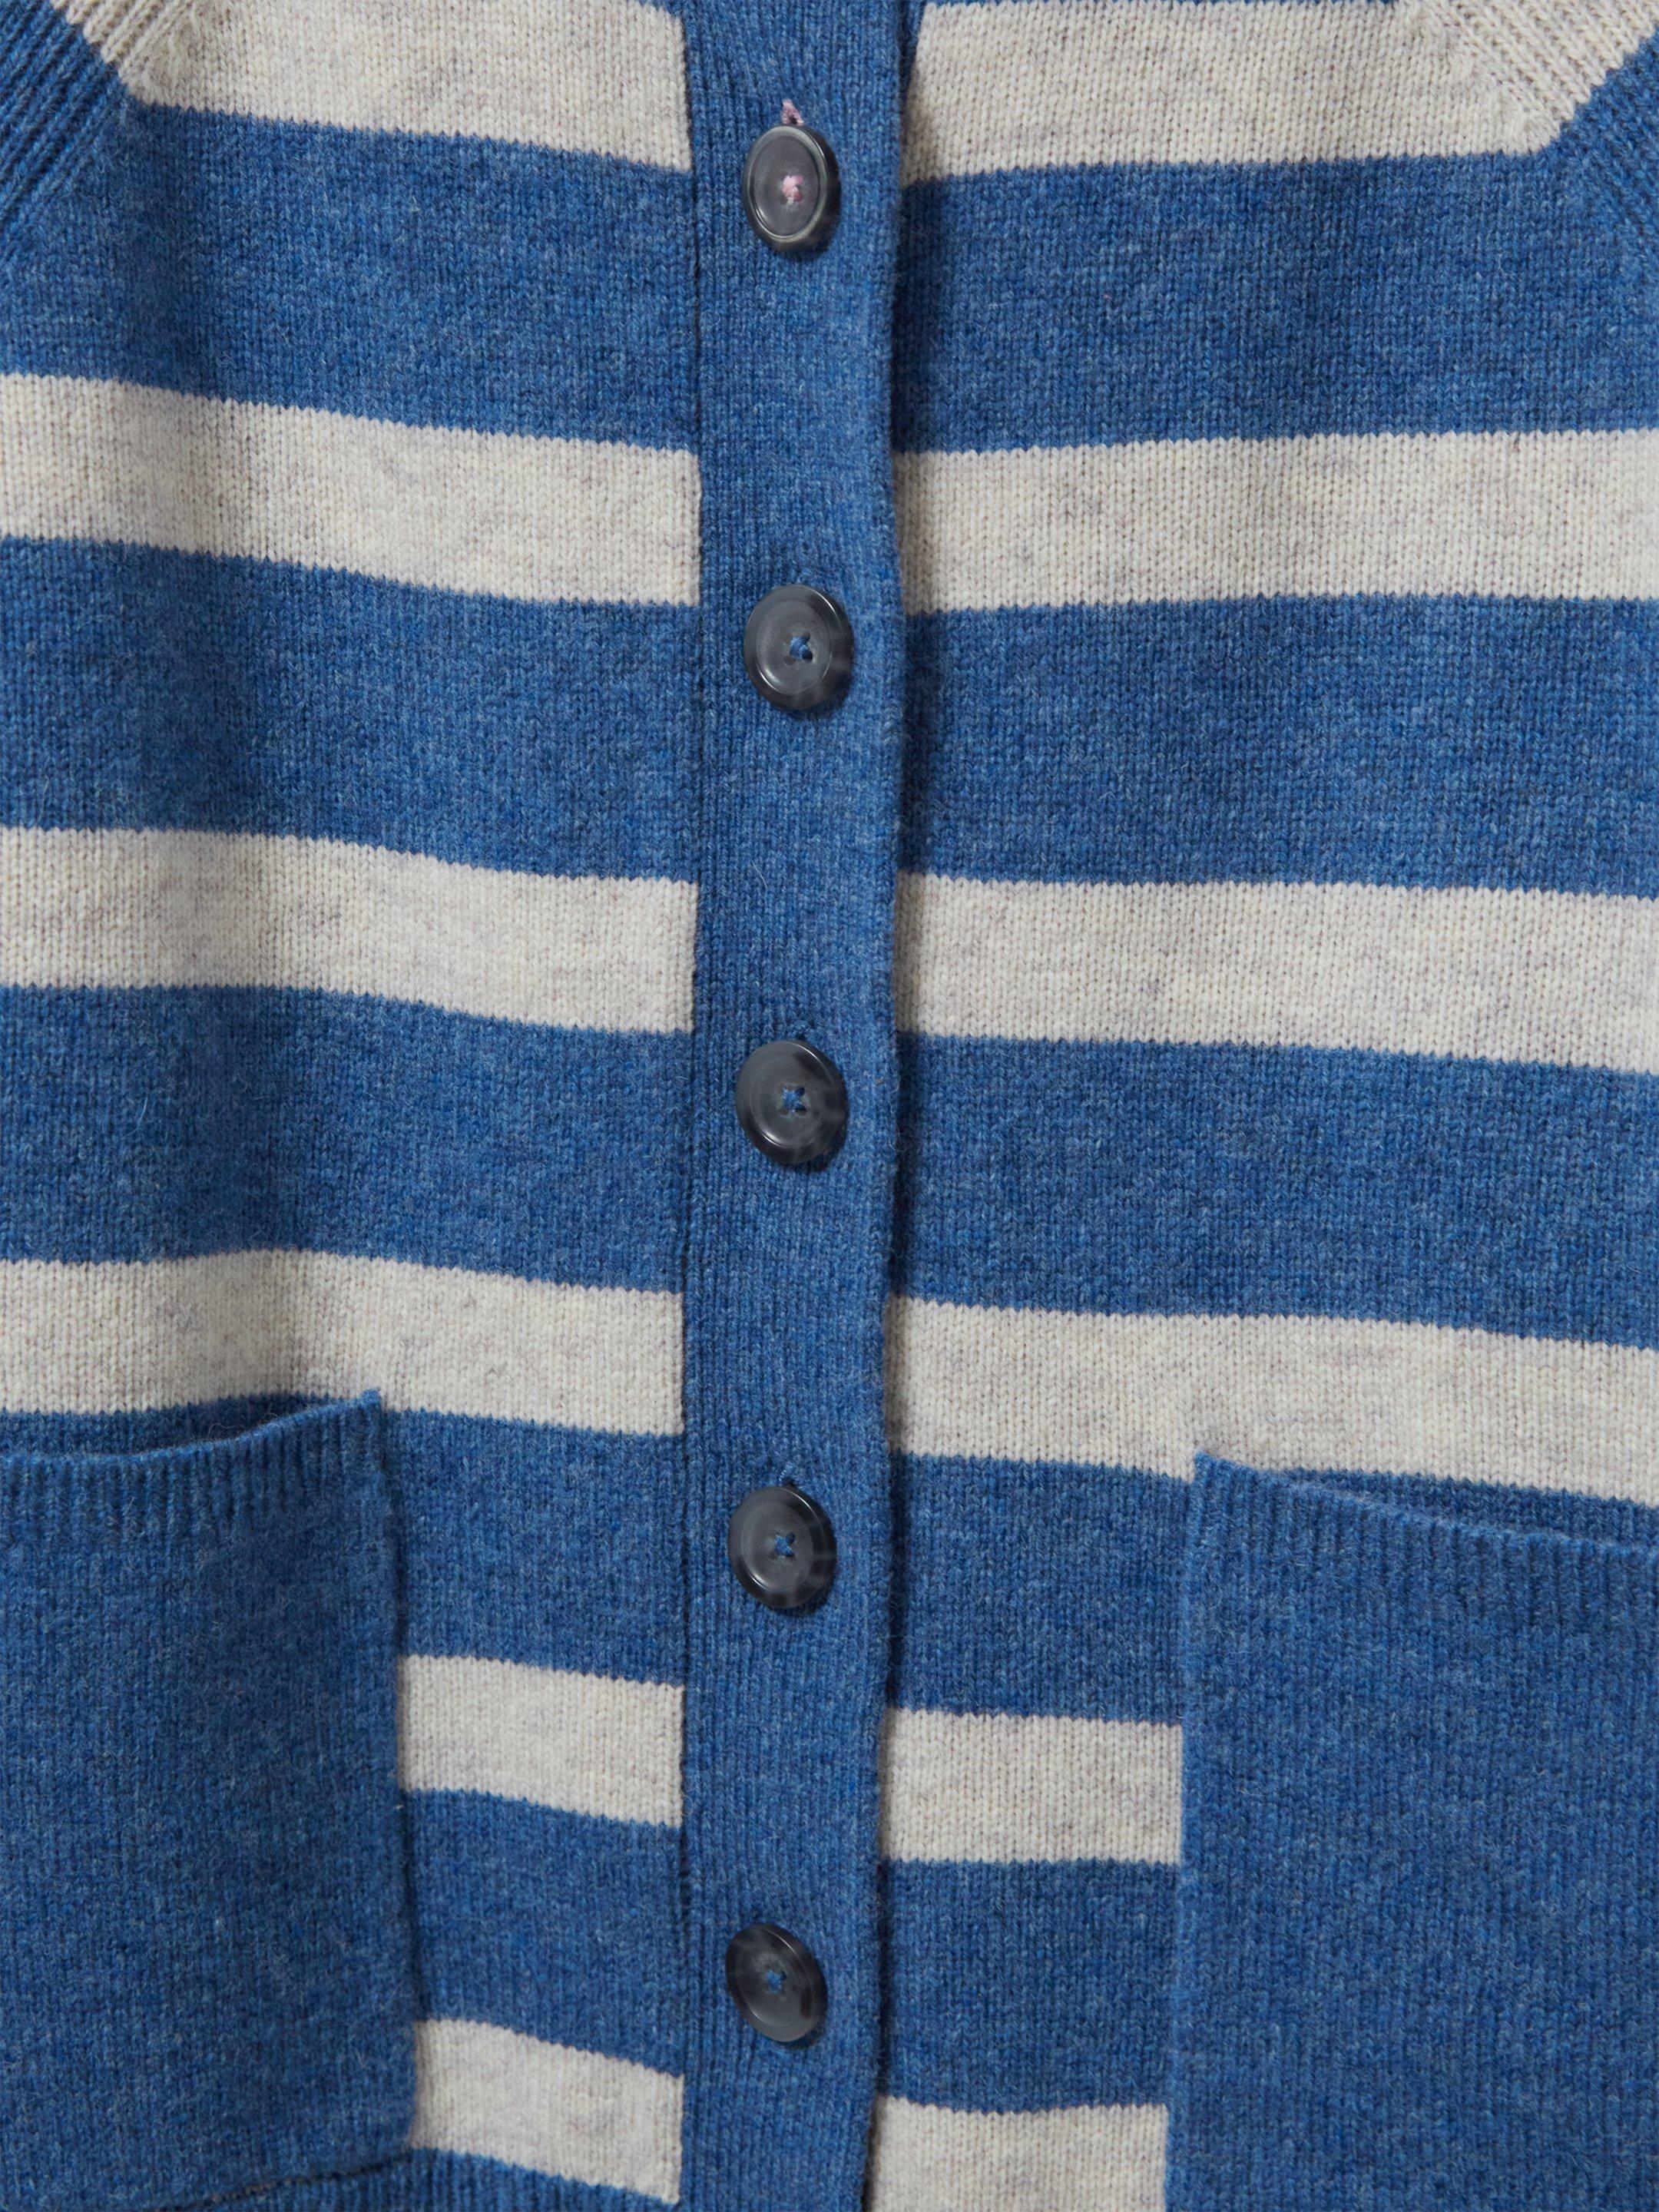 Woodland Cable Cardi in BLUE MLT - FLAT DETAIL